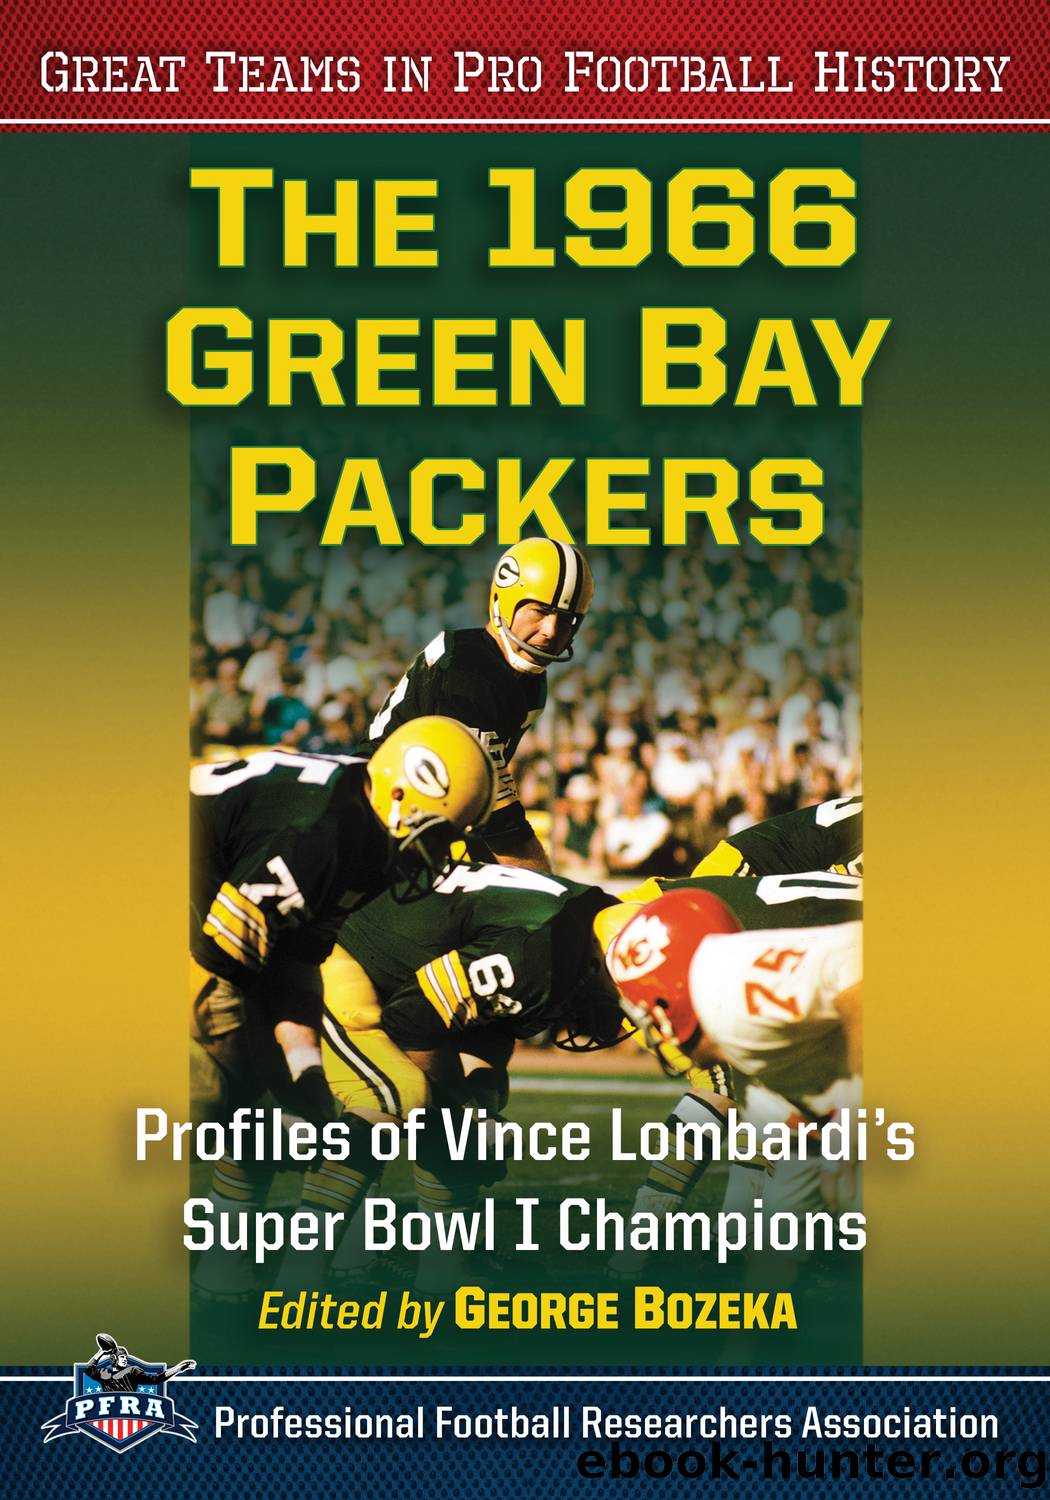 The 1966 Green Bay Packers by George Bozeka